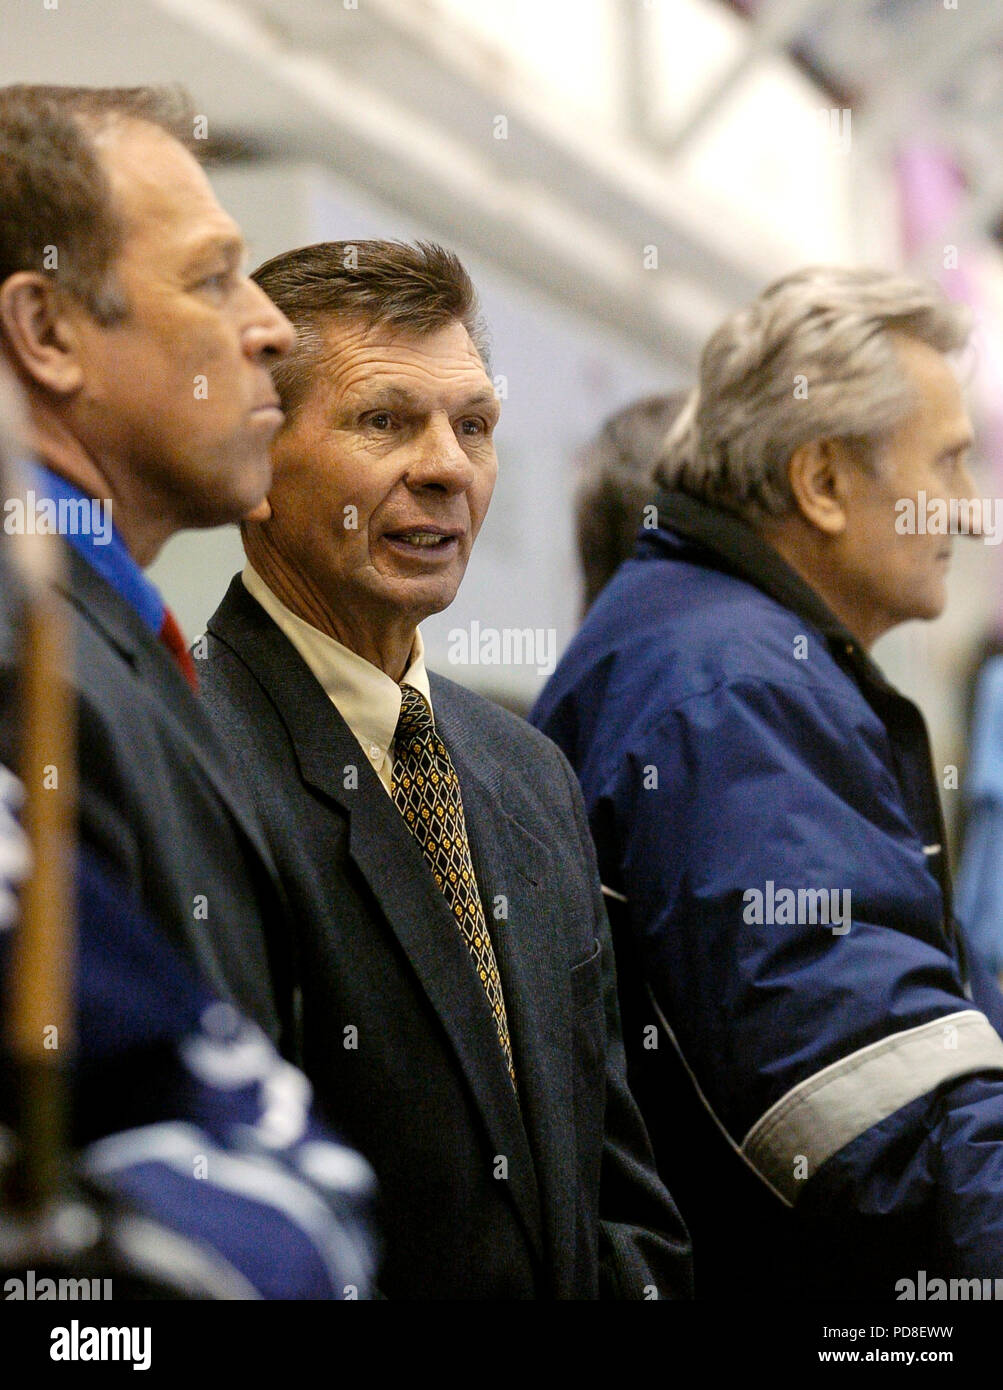 Bratislava, Slovakia. 04th Dec, 2004. ***FILE PHOTO*** Stan Mikita  (center), legendary Slovak-born Canadian former ice hockey player for the  Chicago Black Hawks of NHL, is seen during an exhibition ice hockey match